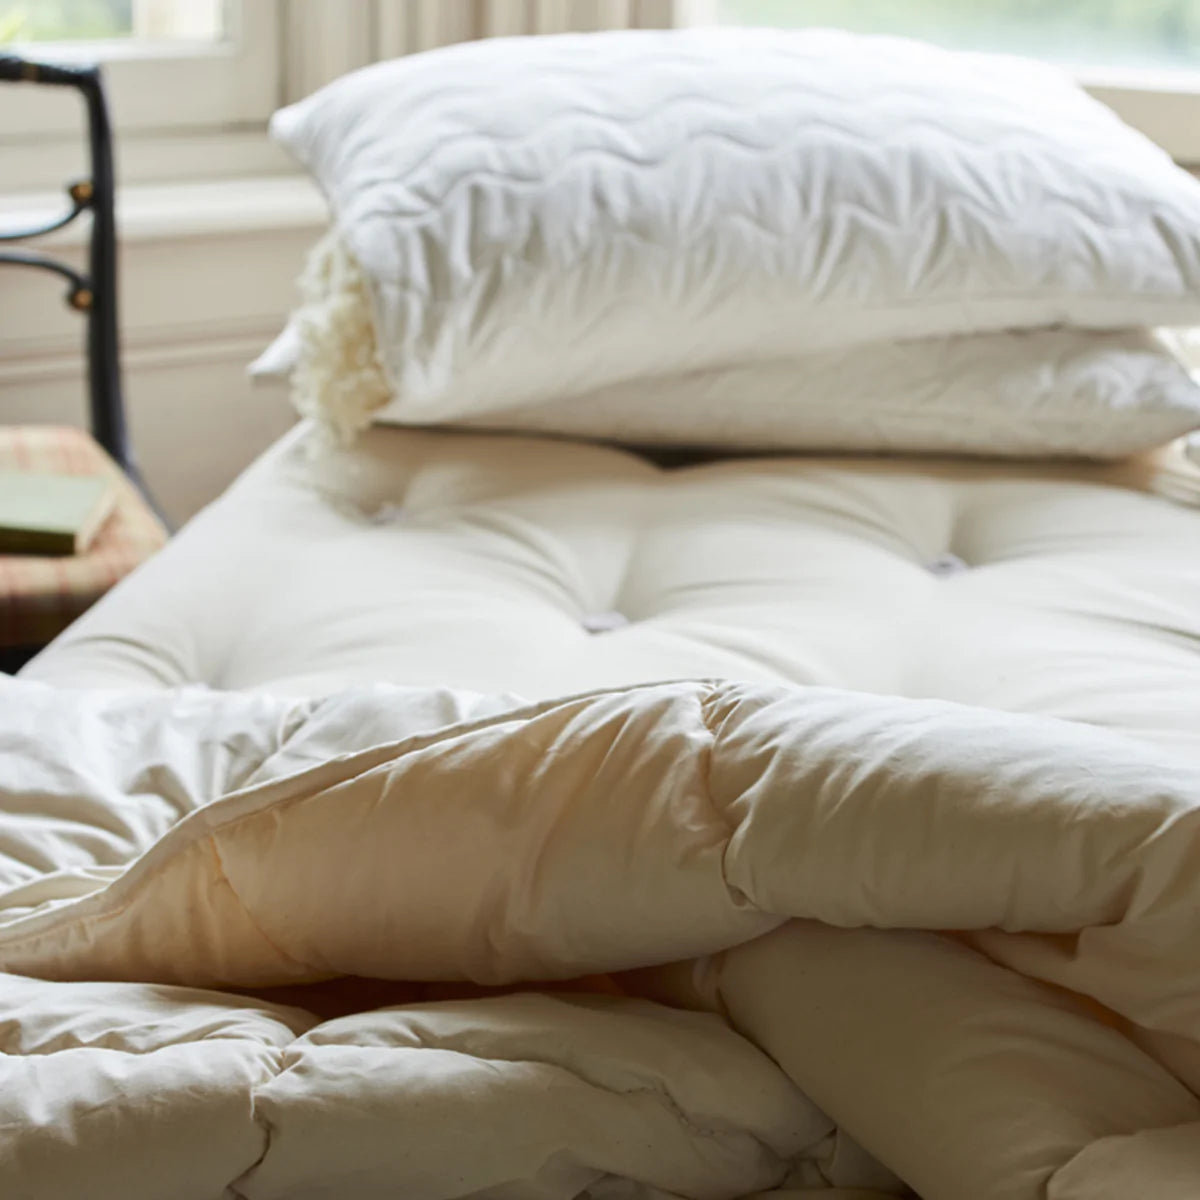 Organic Bed Covers and extras